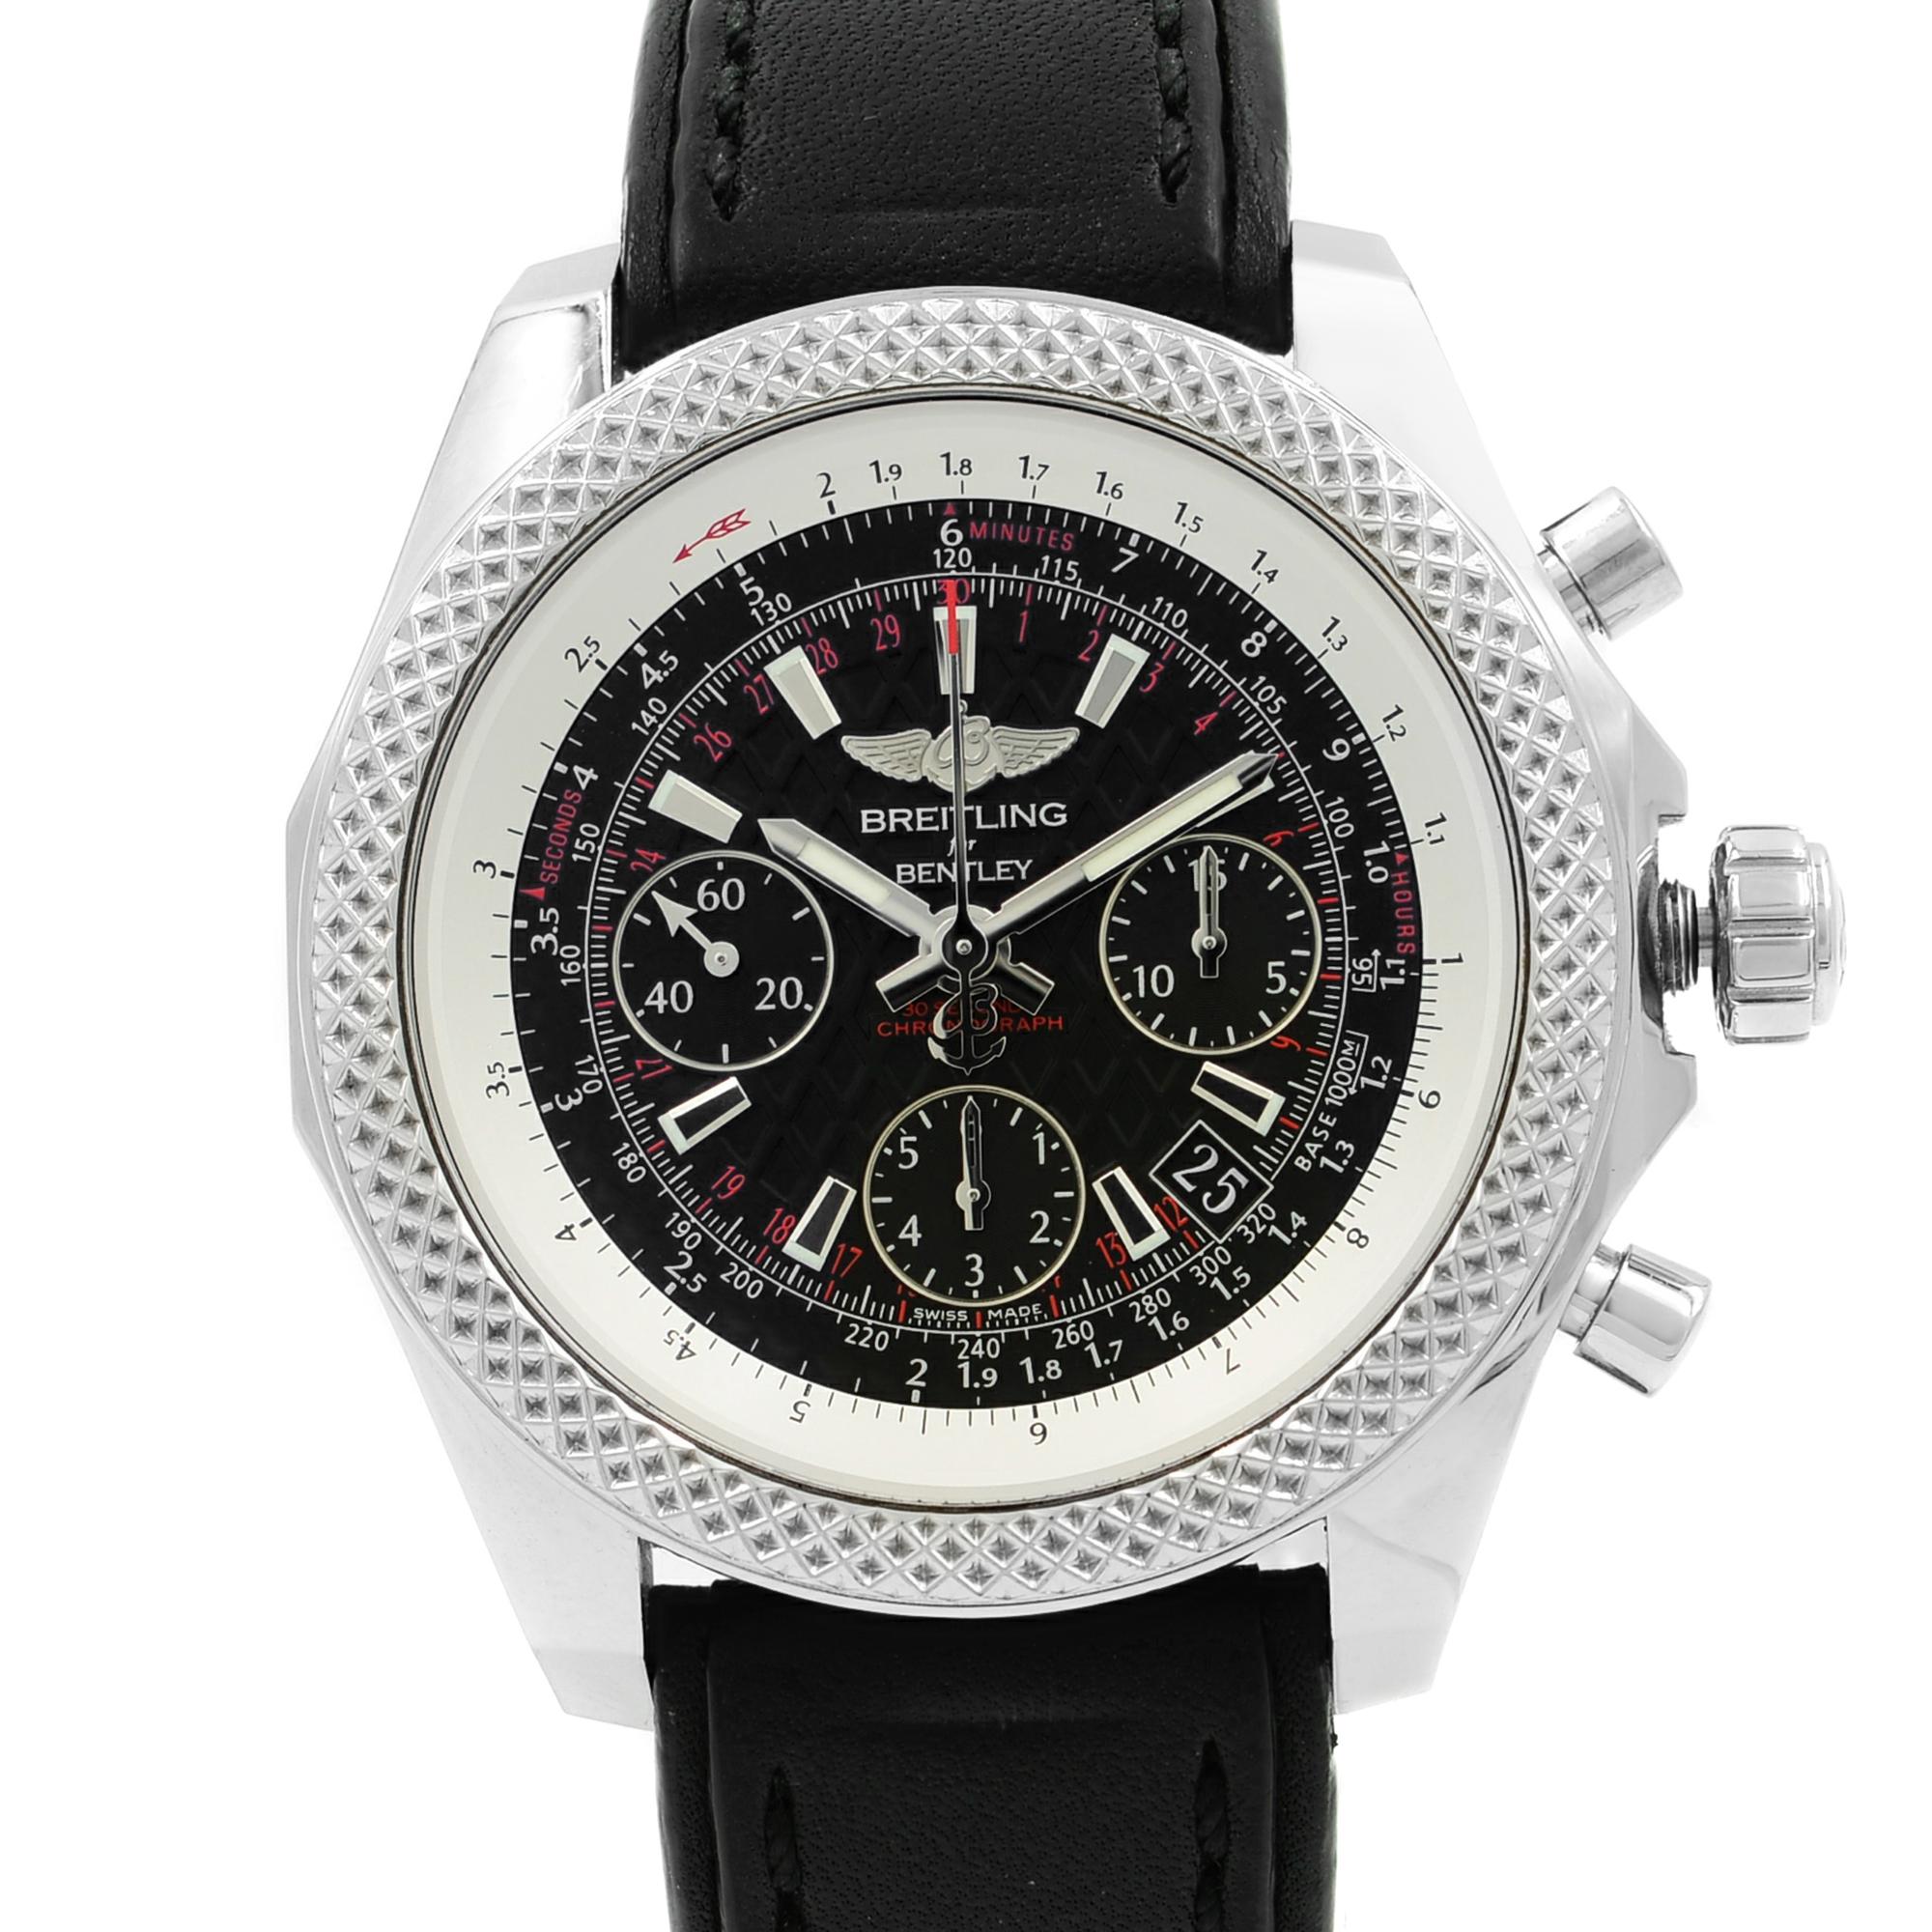 This pre-owned Breitling Bentley AB061221/BD93-480X is a beautiful men's timepiece that is powered by an automatic movement which is cased in a stainless steel case. It has a round shape face, chronograph, date, small seconds subdial dial and has